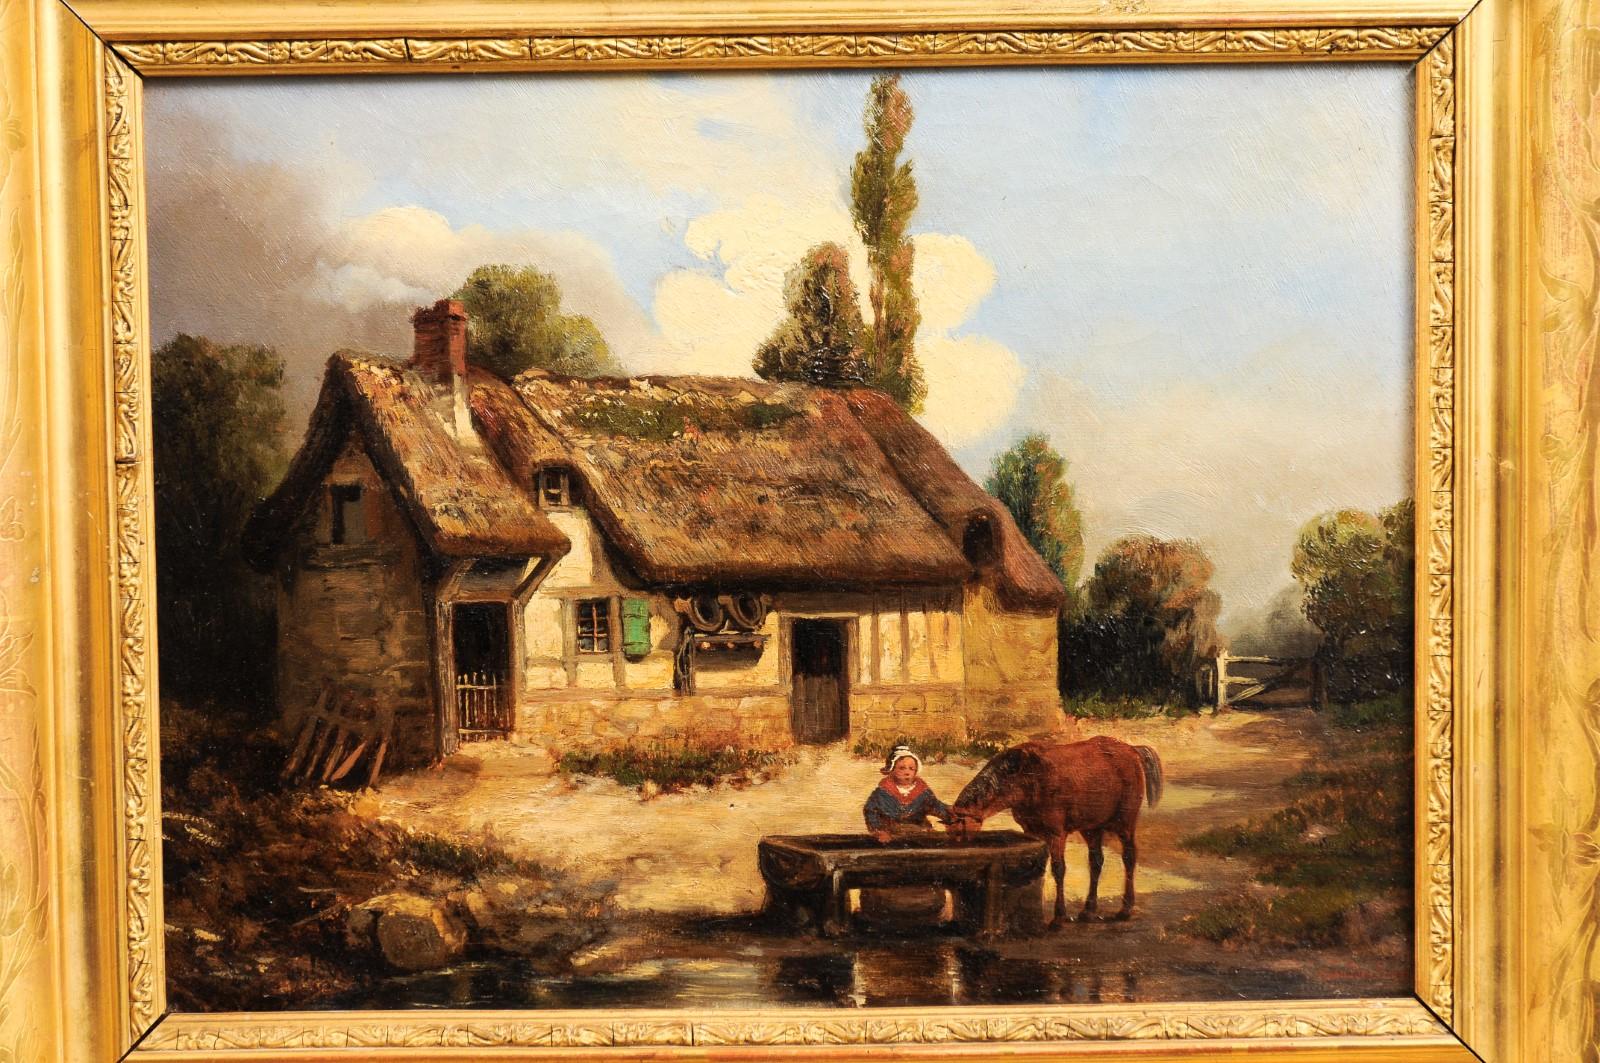 French 19th Century Painting Signed Léon Bertan Depicting a Bucolic Farm Scene For Sale 3